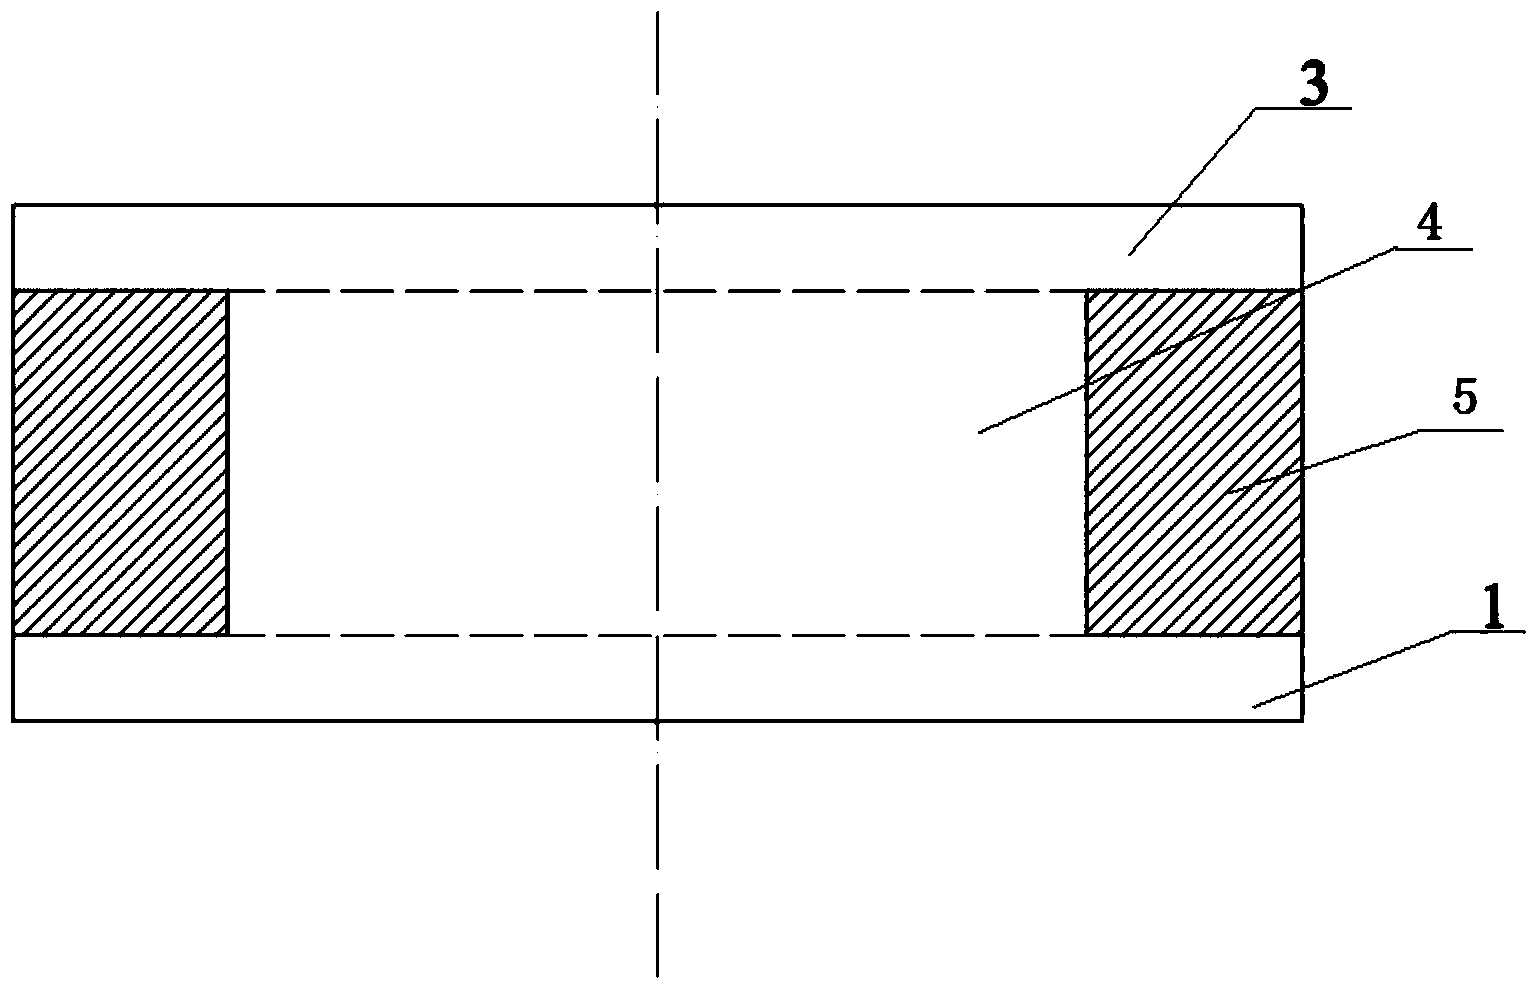 Low-frequency vibration-isolation combined sandwiched structure